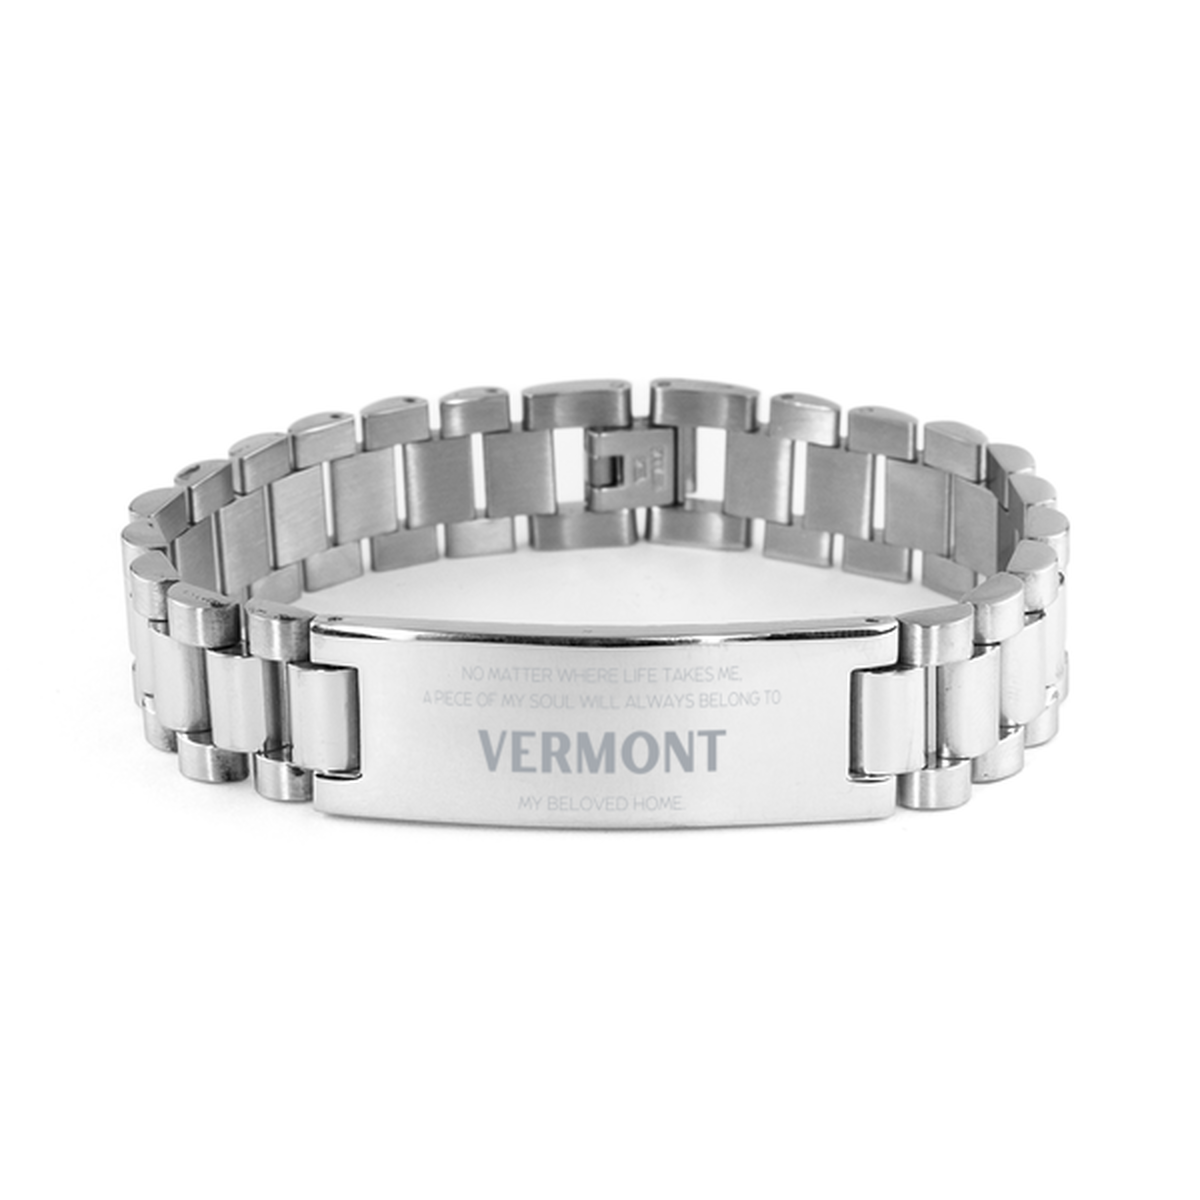 Love Vermont State Gifts, My soul will always belong to Vermont, Proud Ladder Stainless Steel Bracelet, Birthday Unique Gifts For Vermont Men, Women, Friends